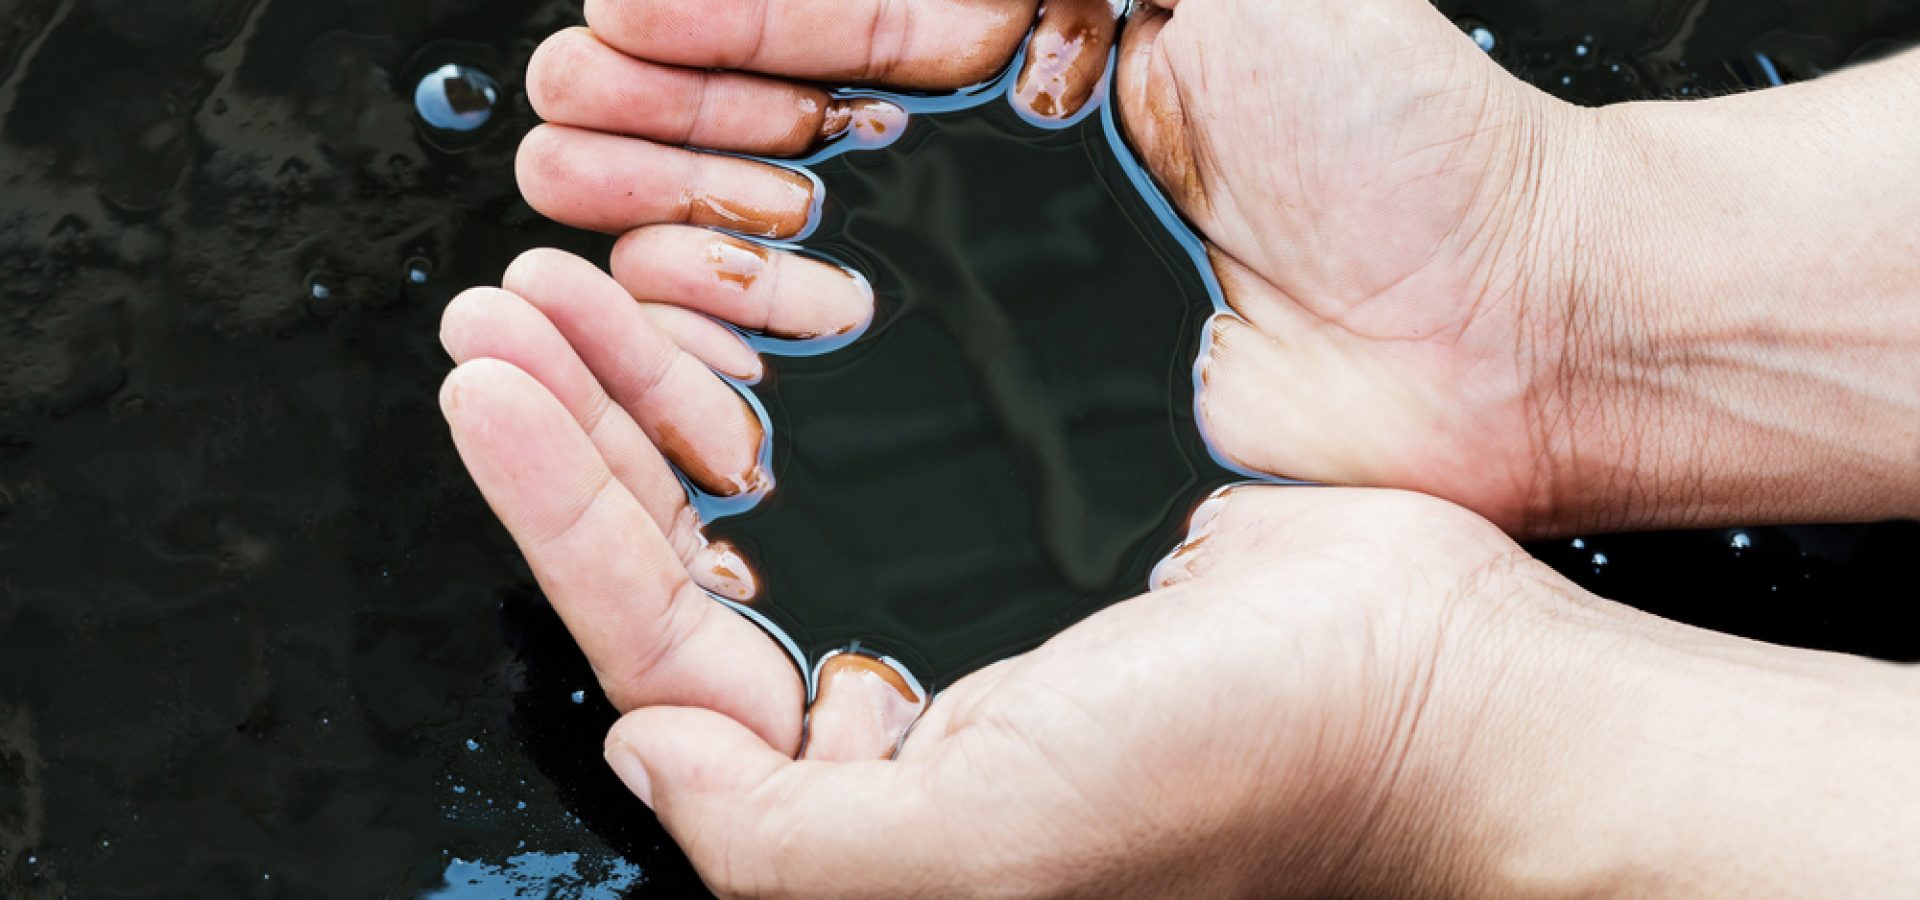 Wibest – Oil and Petroleum: A man picking up crude oil with his bare hands.